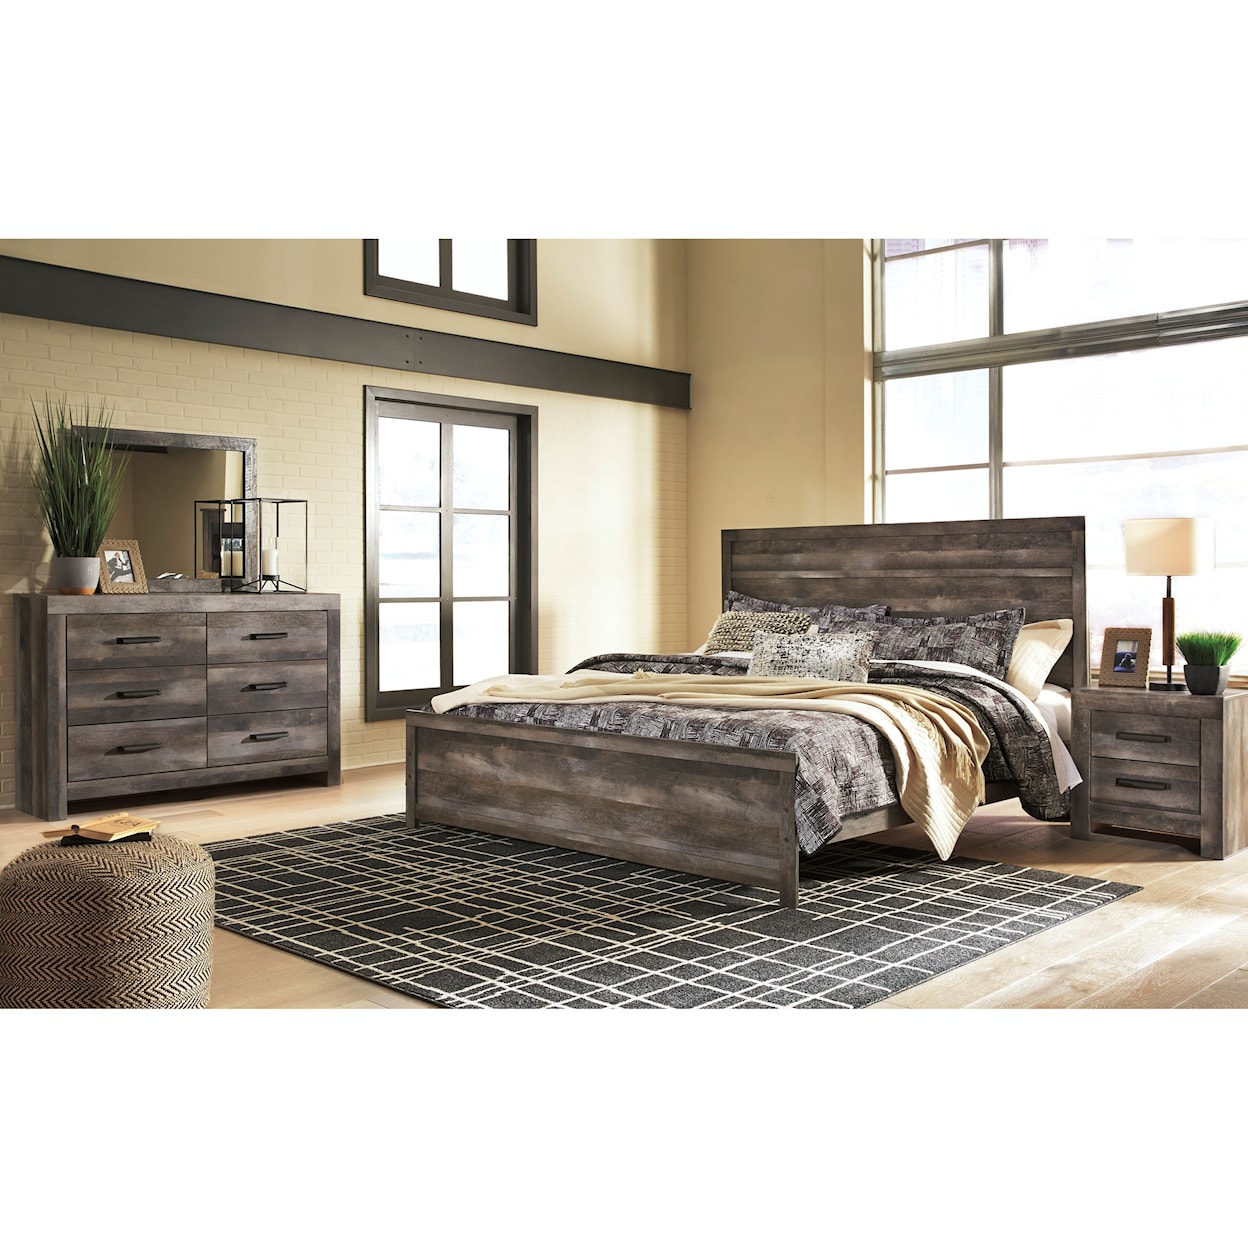 Signature Design by Ashley Furniture Wynnlow King Bedroom Group